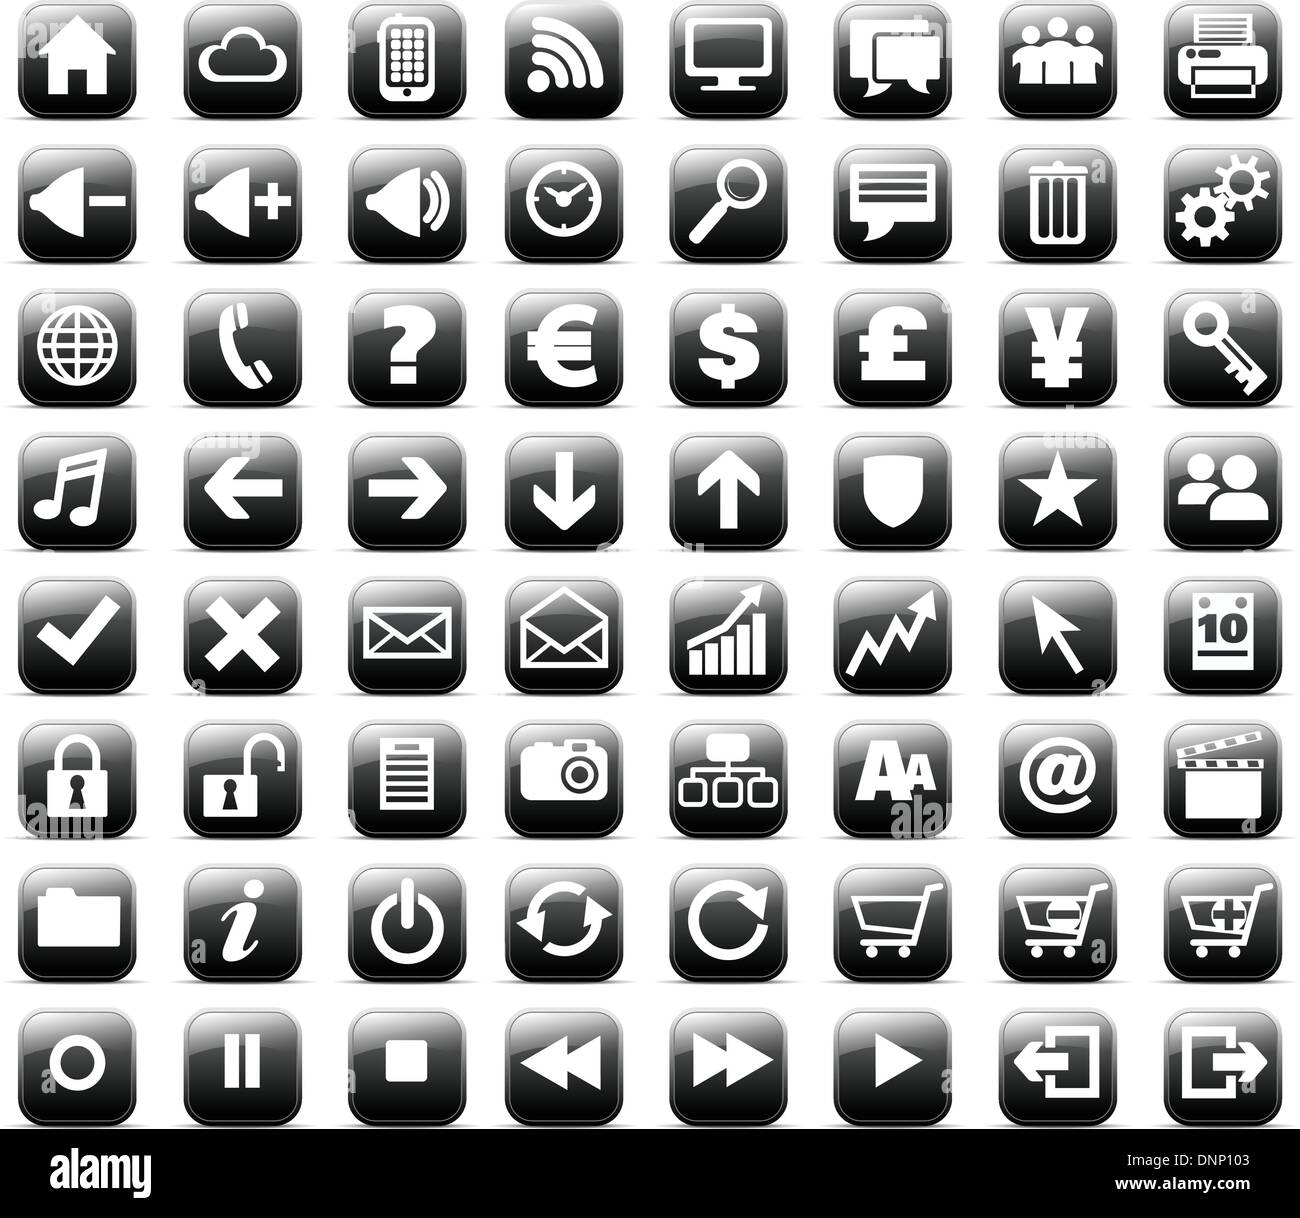 64 multimedia and web icons designed to be recognizable at a very small size Stock Vector